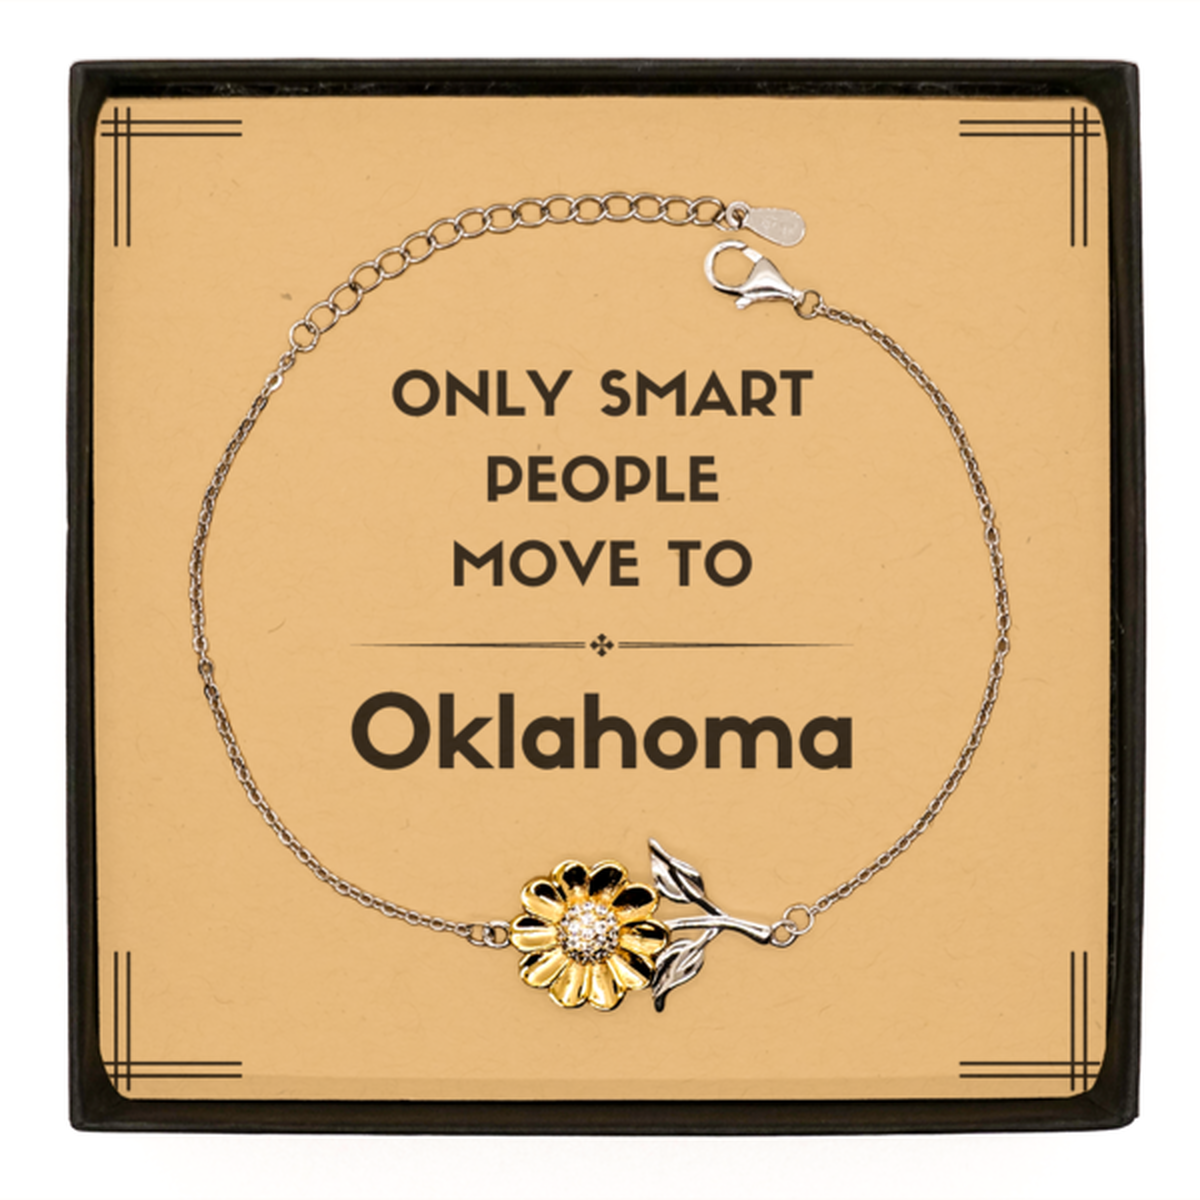 Only smart people move to Oklahoma Sunflower Bracelet, Message Card Gifts For Oklahoma, Move to Oklahoma Gifts for Friends Coworker Funny Saying Quote